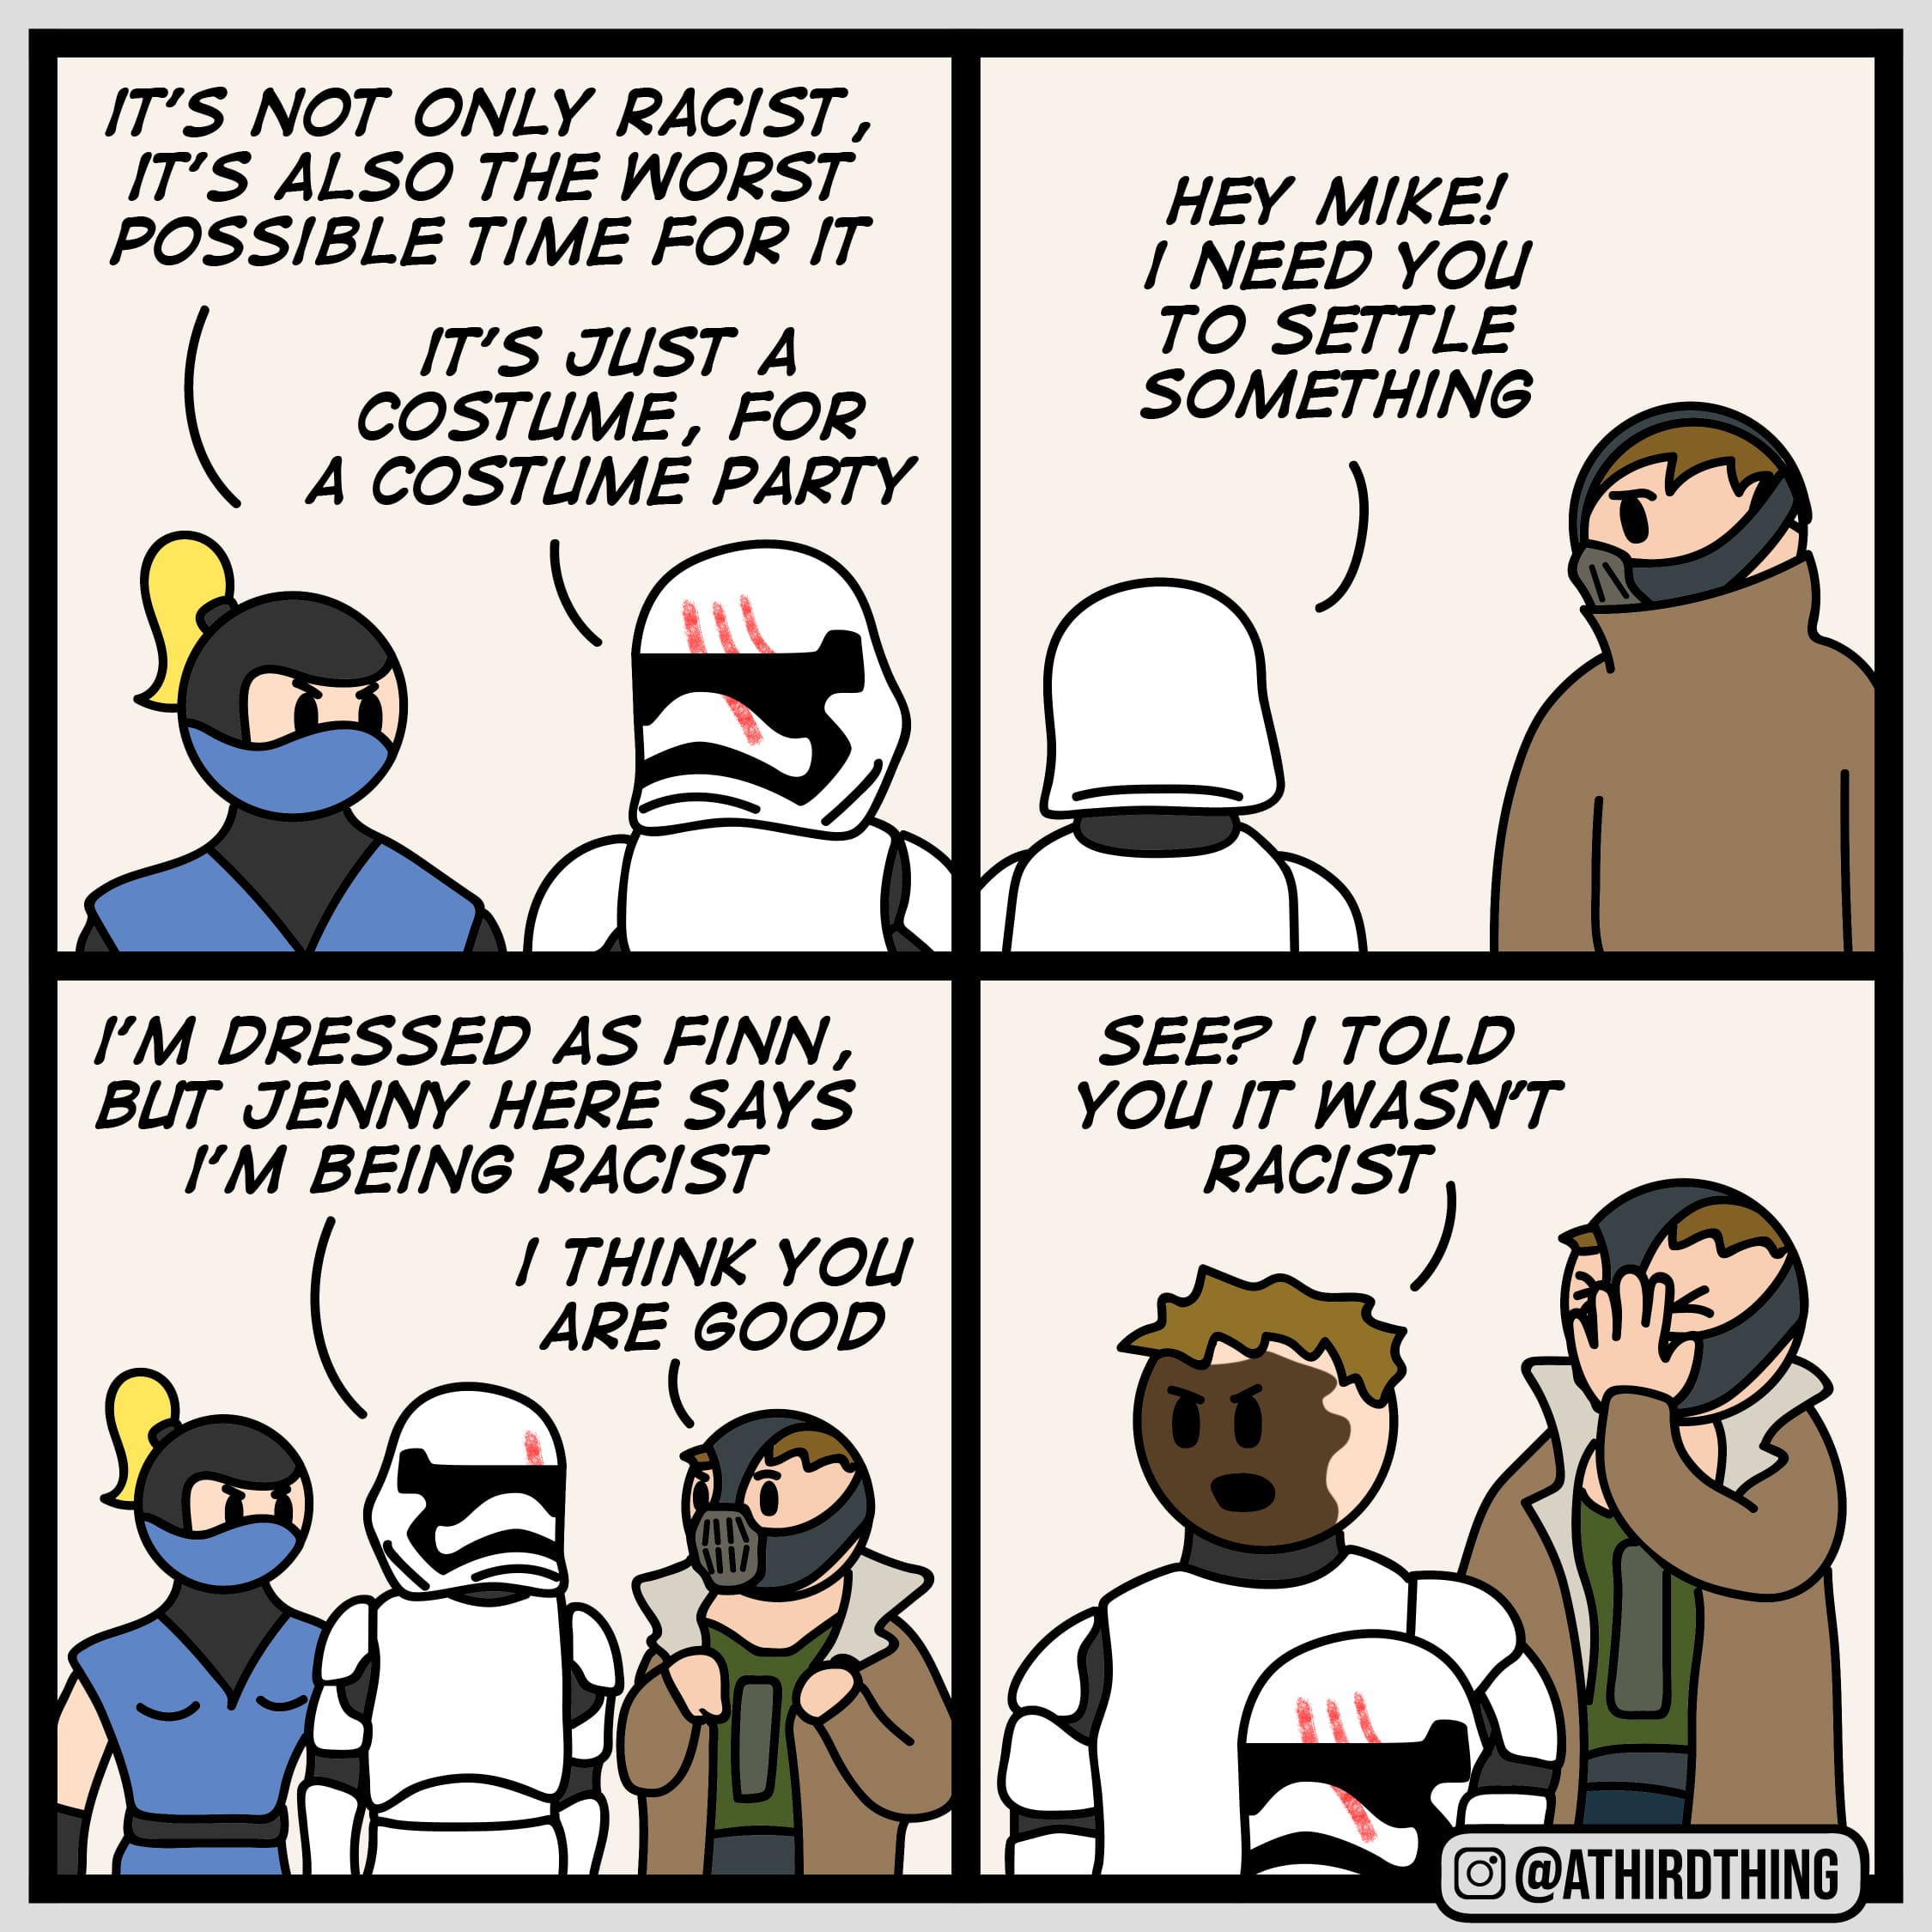  costume party - bonus panels on comments(from rodmantis), Finn, Jenny, Japanese, Japan, Bonus Panel Comics  costume party - bonus panels on comments(from rodmantis), Finn, Jenny, Japanese, Japan, Bonus Panel text: IT'S NOT ONLY RACIST, IT's ALSO THE wopsr POSSIBLE TIME FOR m COSTUME, FOR A COSTUME PARTY I'M DRESSED AS FINN, BUT JENW HERE SAYS I'M BE/Ne RACIST / YOU ARE eon Ill 0 HEY MIKE! / NEED YOU TO SETTLE SOMETH/Ne SEE? / TOLD YOU m WASN'T RACIST O@ATHIRDTHING 